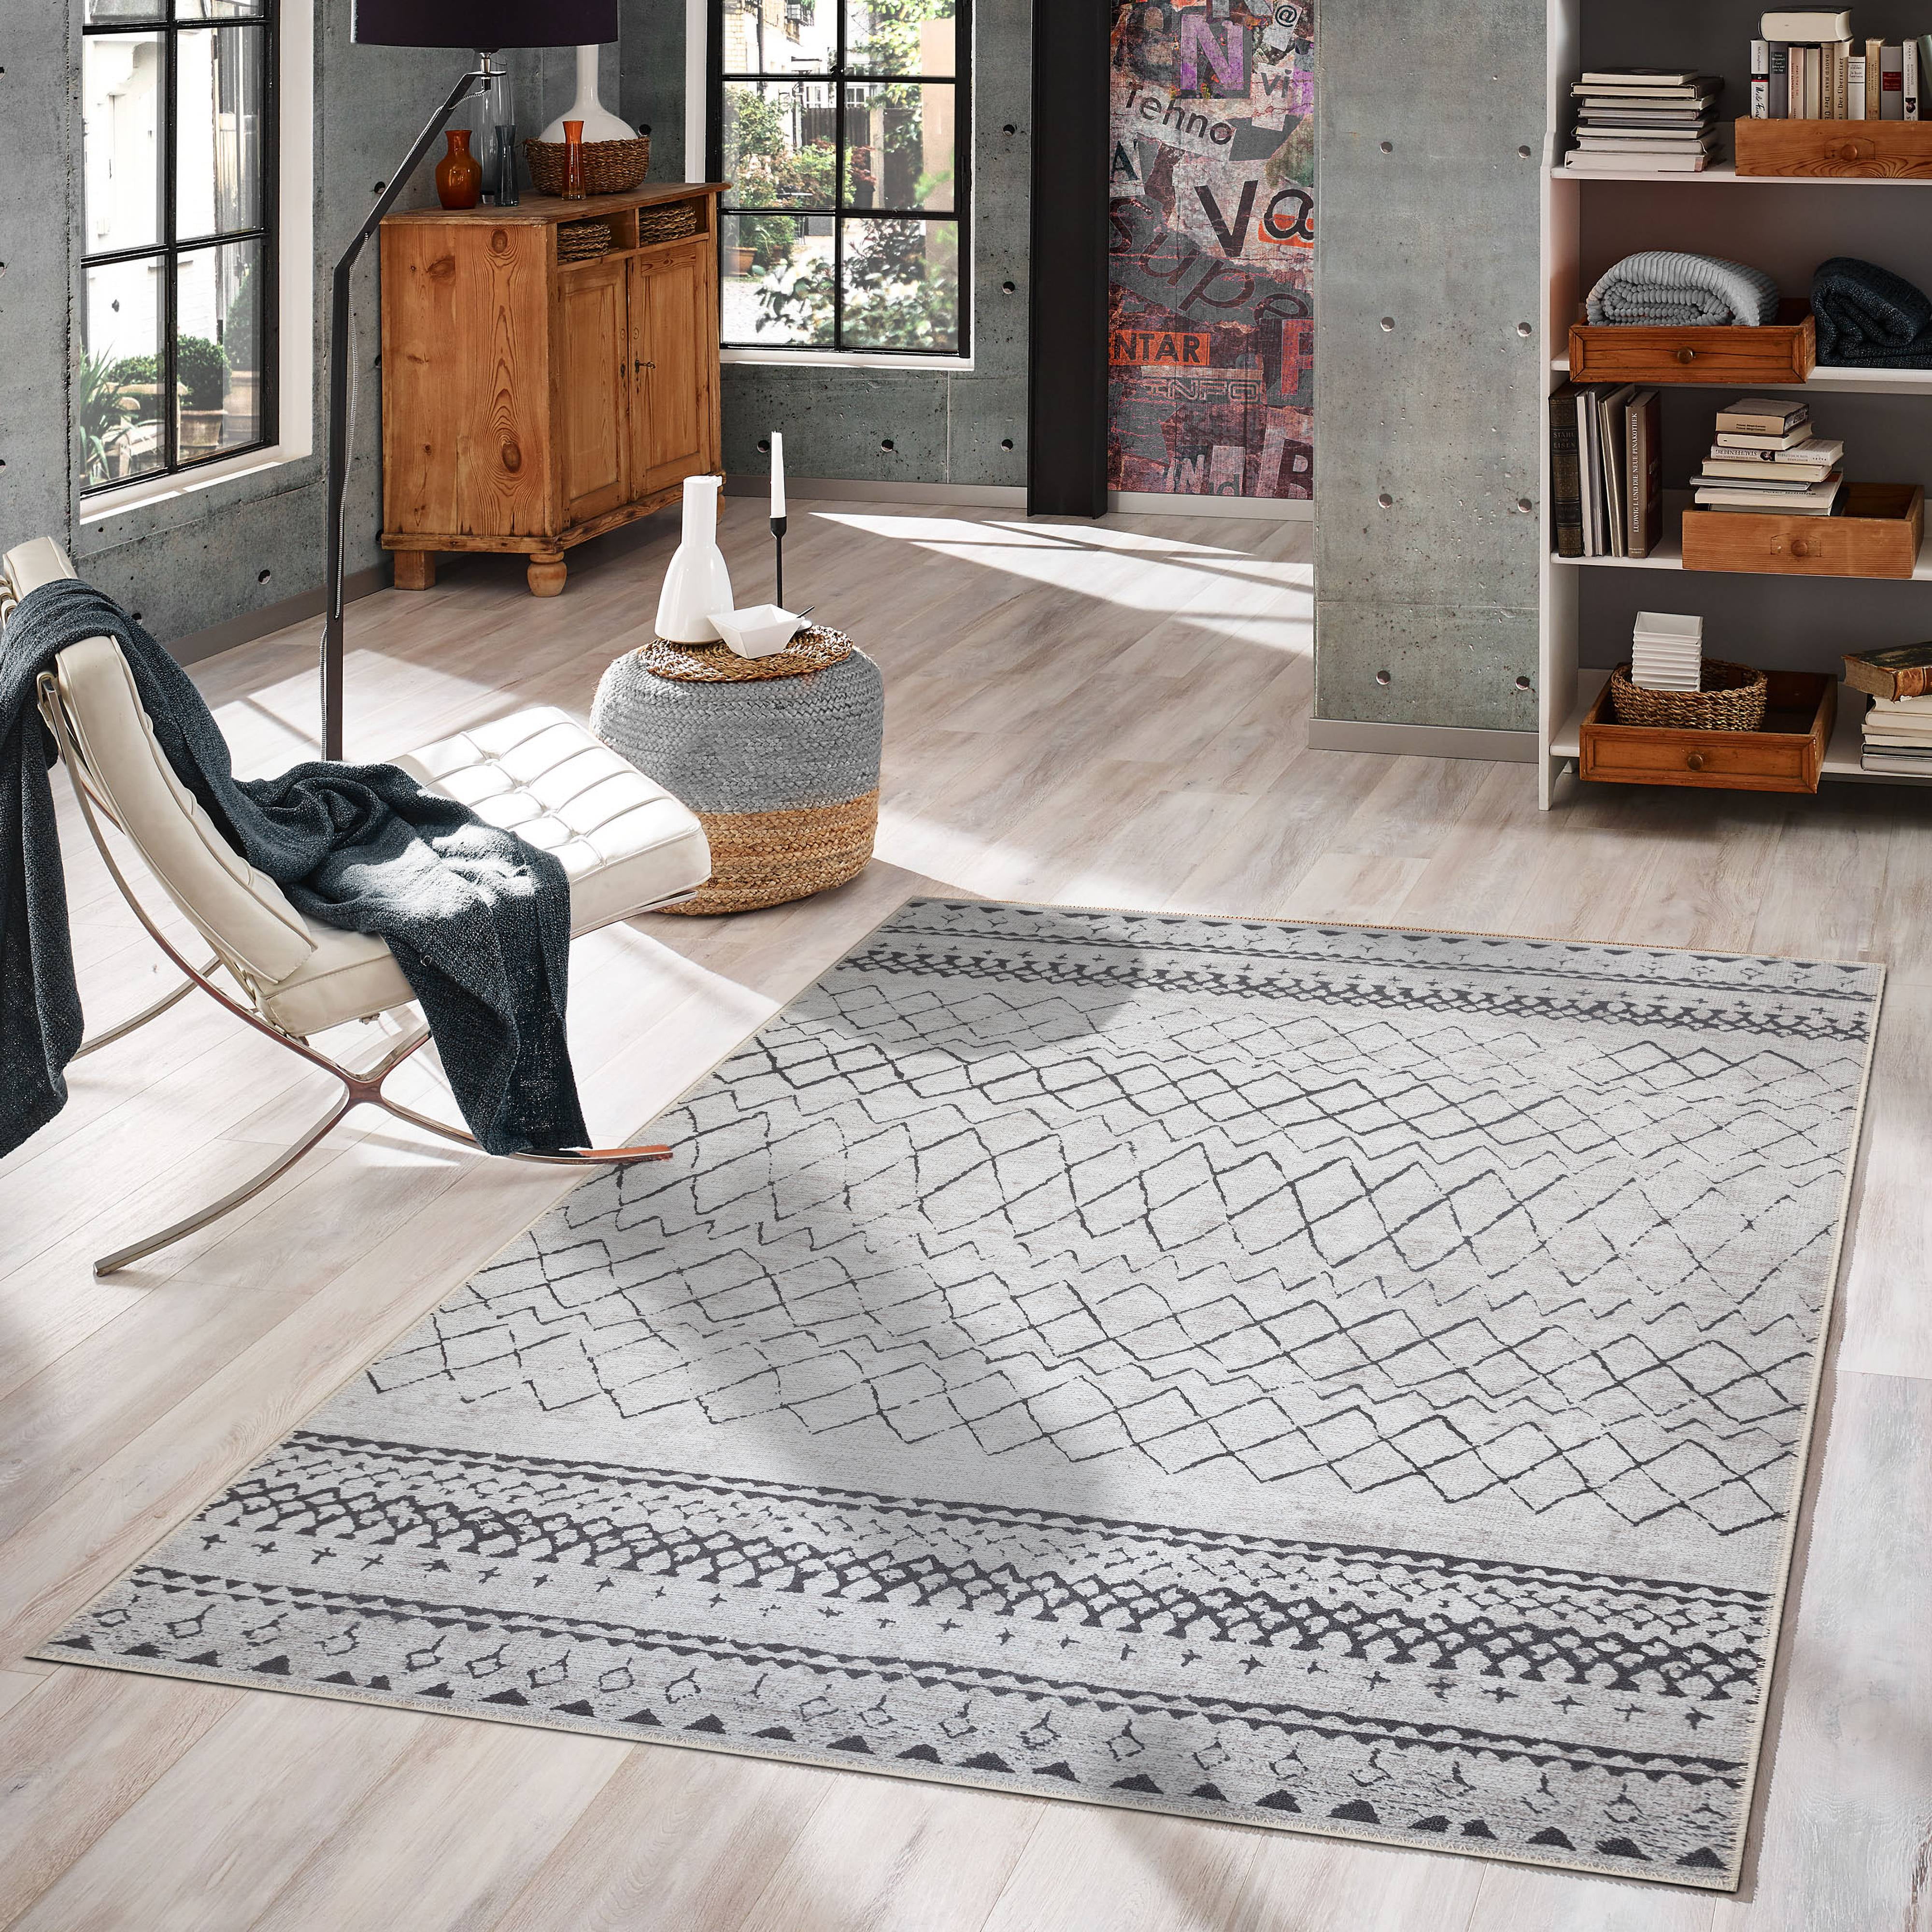 CAMILSON Machine Washable Area Rugs with Non Slip (Anti-Slip) Backing for  Living Room Bedroom, Distressed Vintage Washable Rug 8x10, Stain and Water